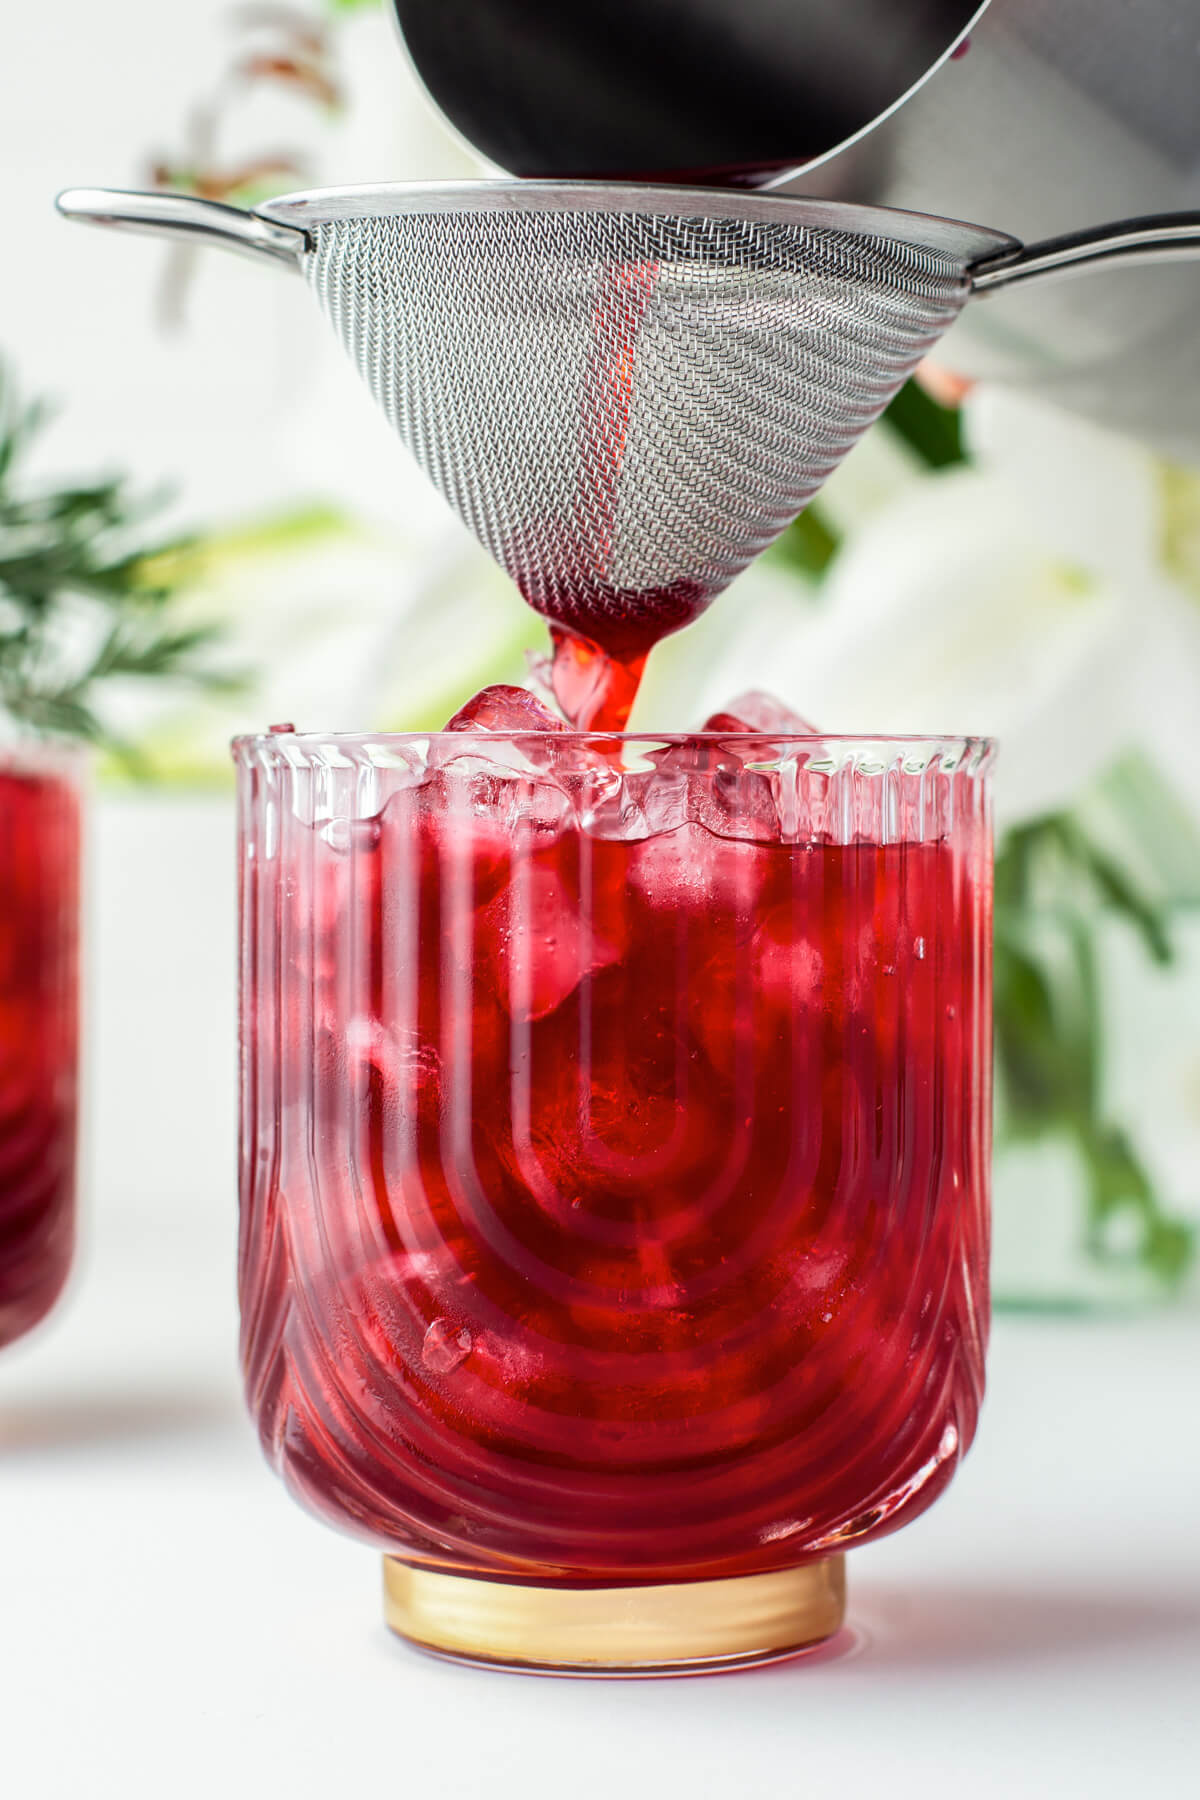 Straining the ruby red Hibiscus Pomegranate Margarita into an ice filled rocks glass.